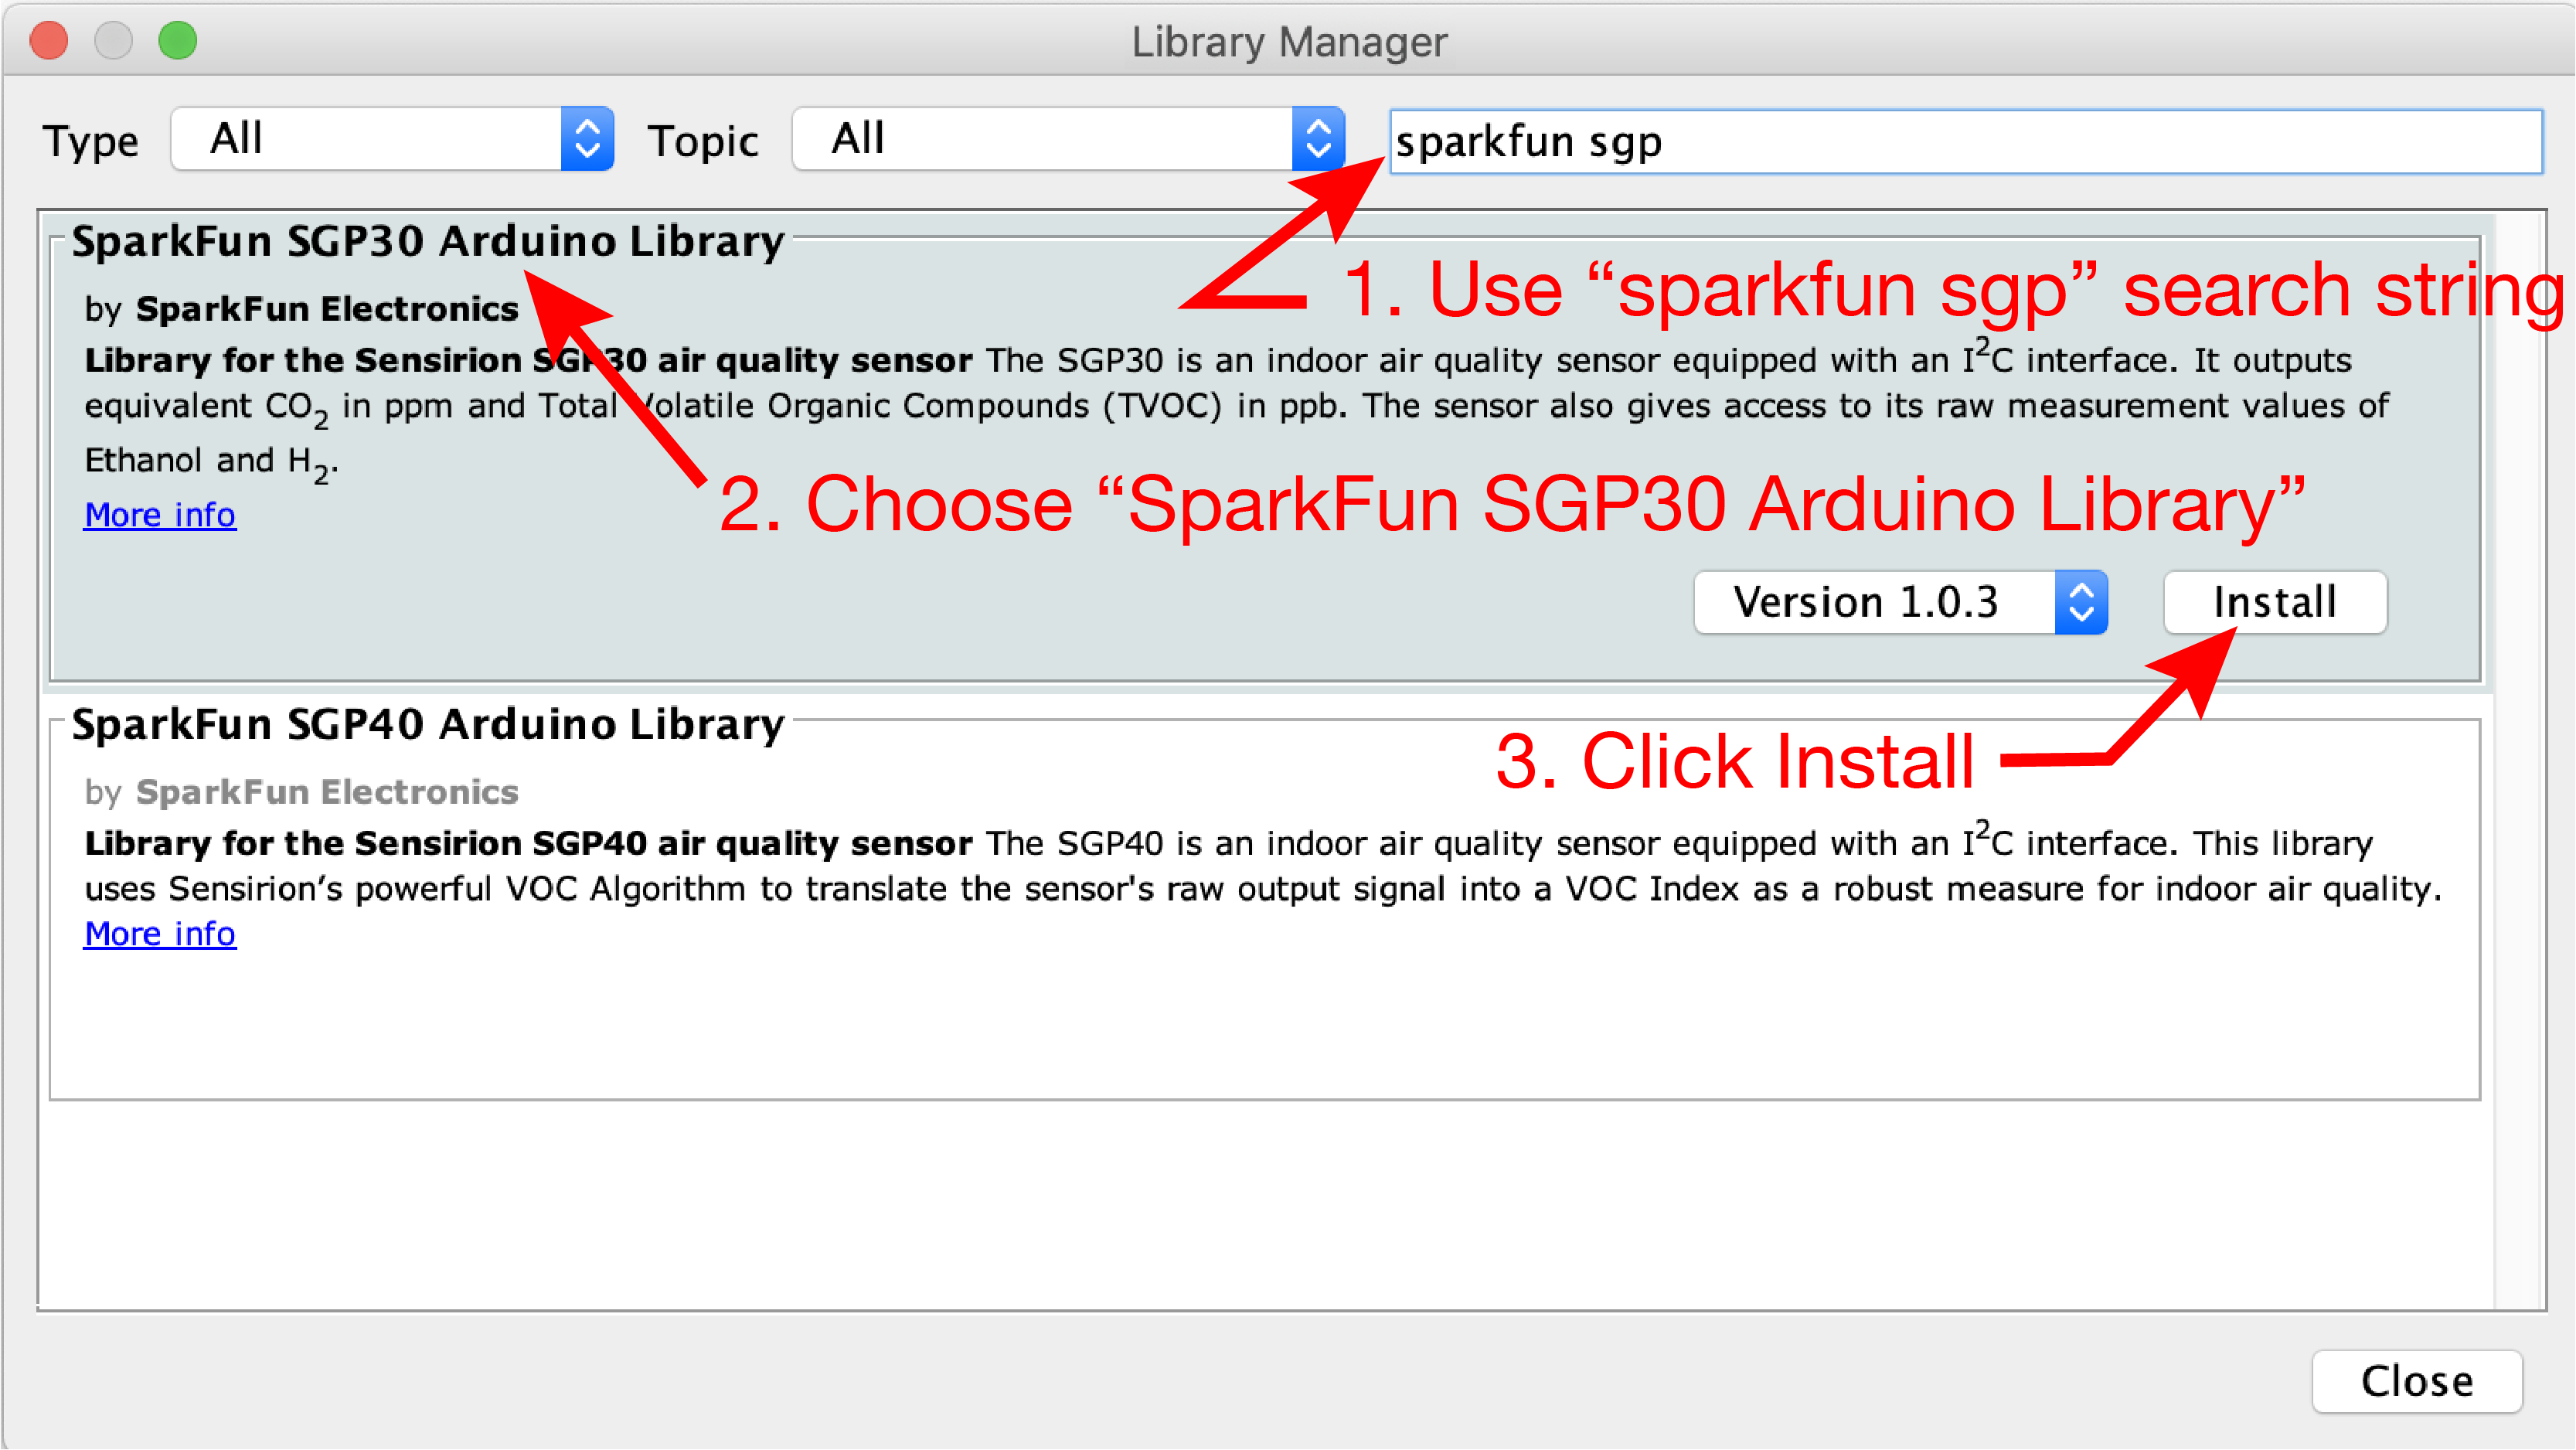 Select and install the SparkFun SGP30 Arduino library